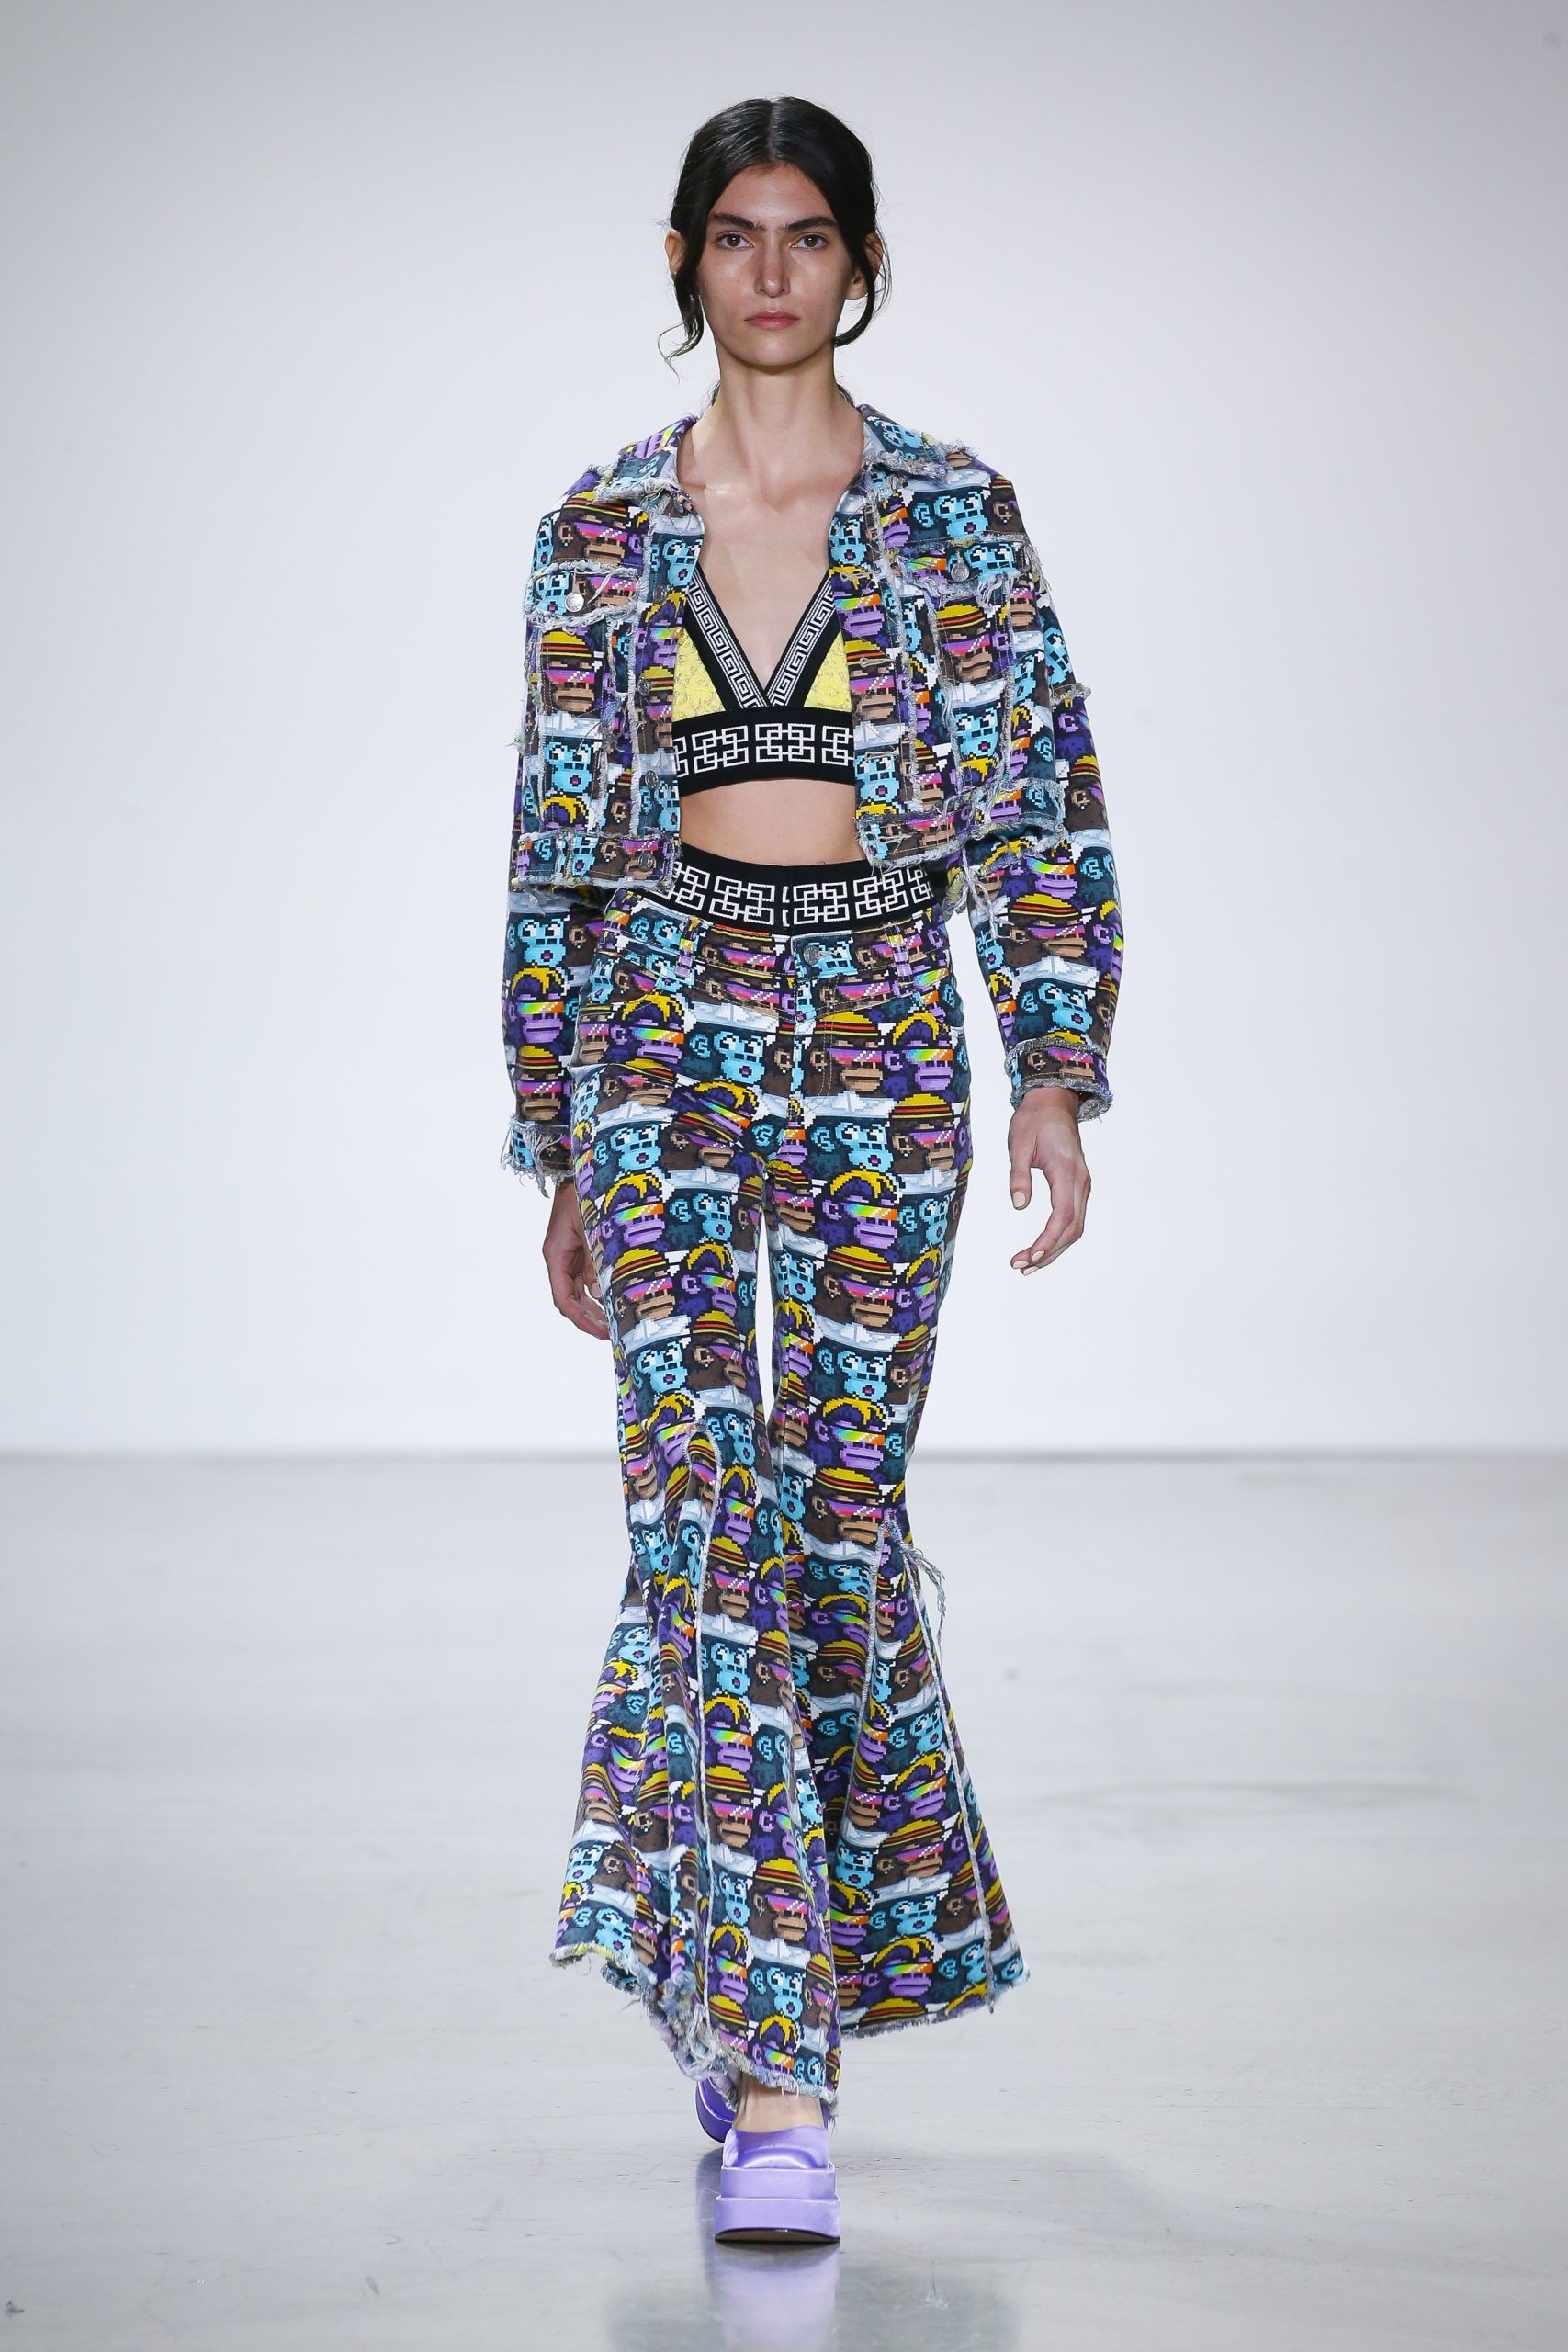 Female model with printed jacket and trousers at Metaverse, Past, Present, and Future SS23 show at New York Fashion Week 